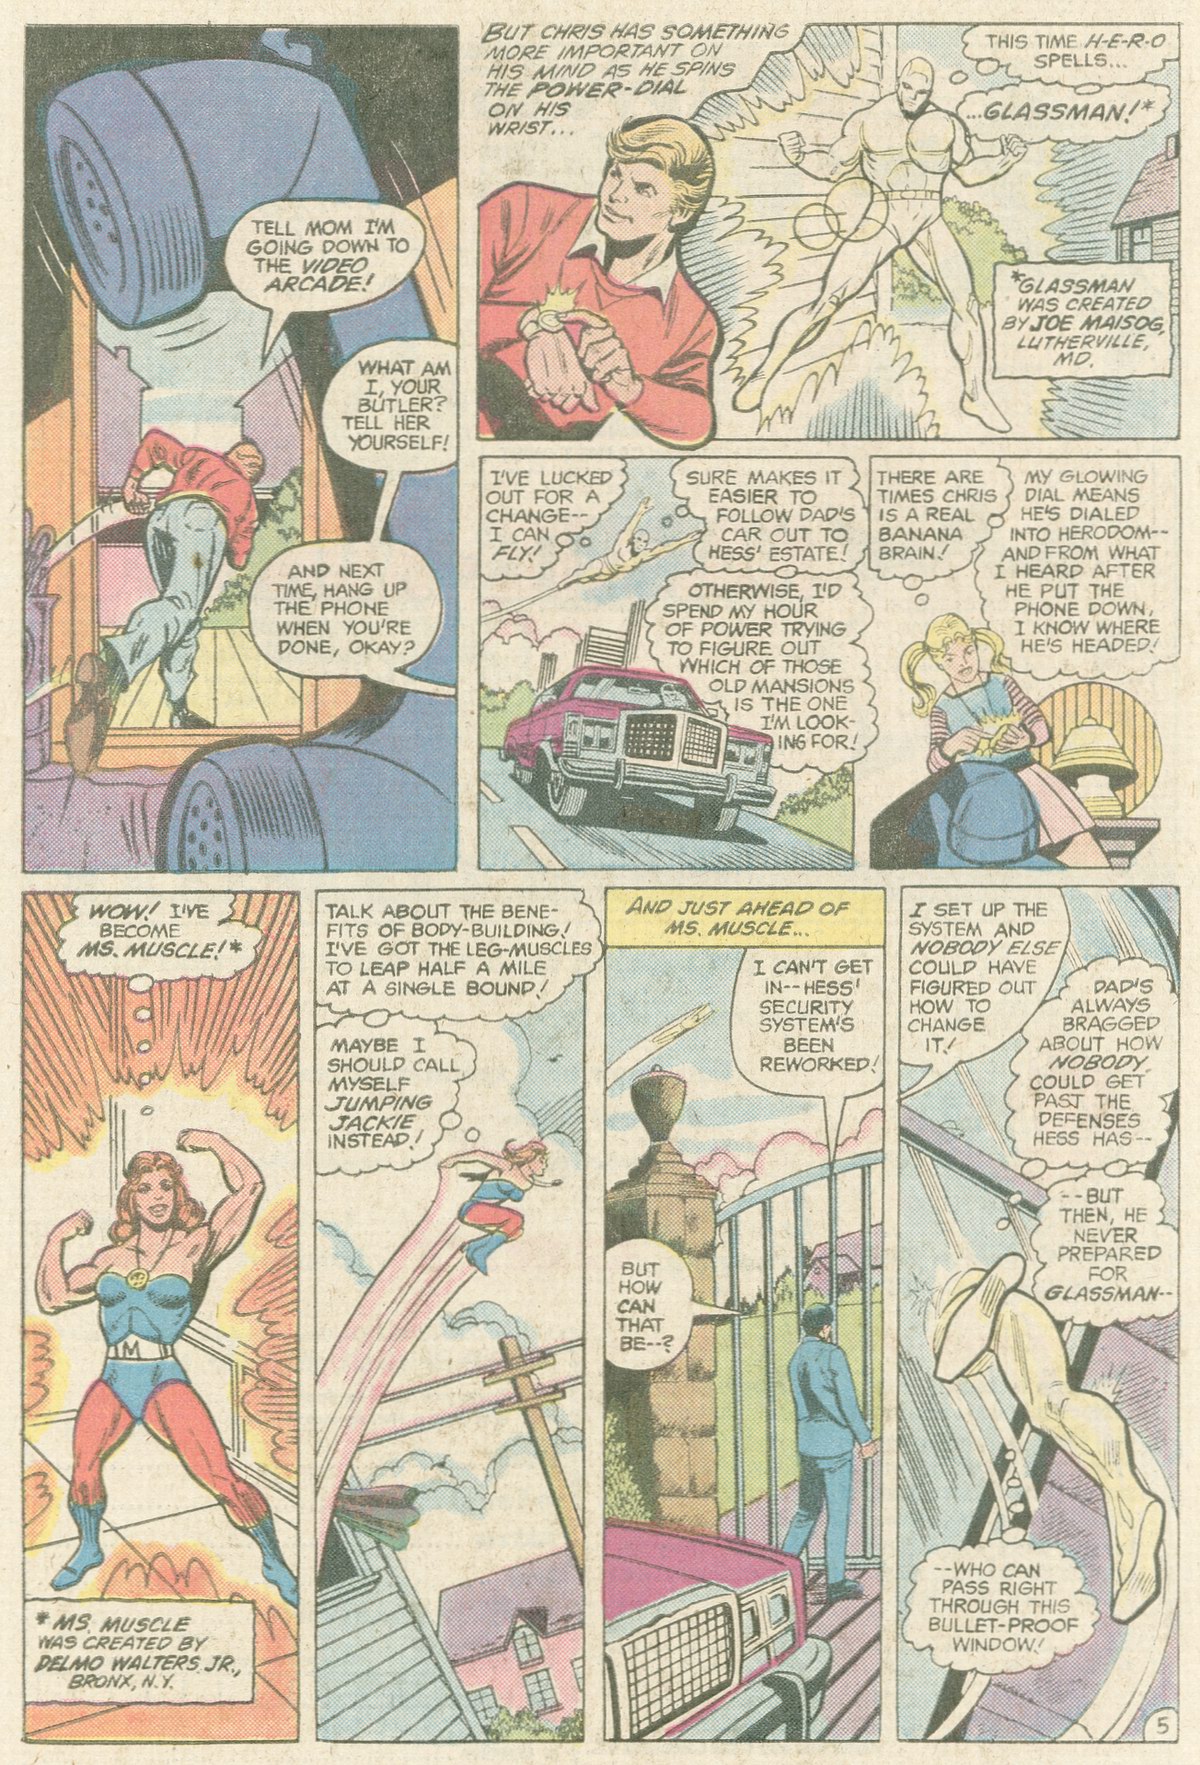 The New Adventures of Superboy 41 Page 24